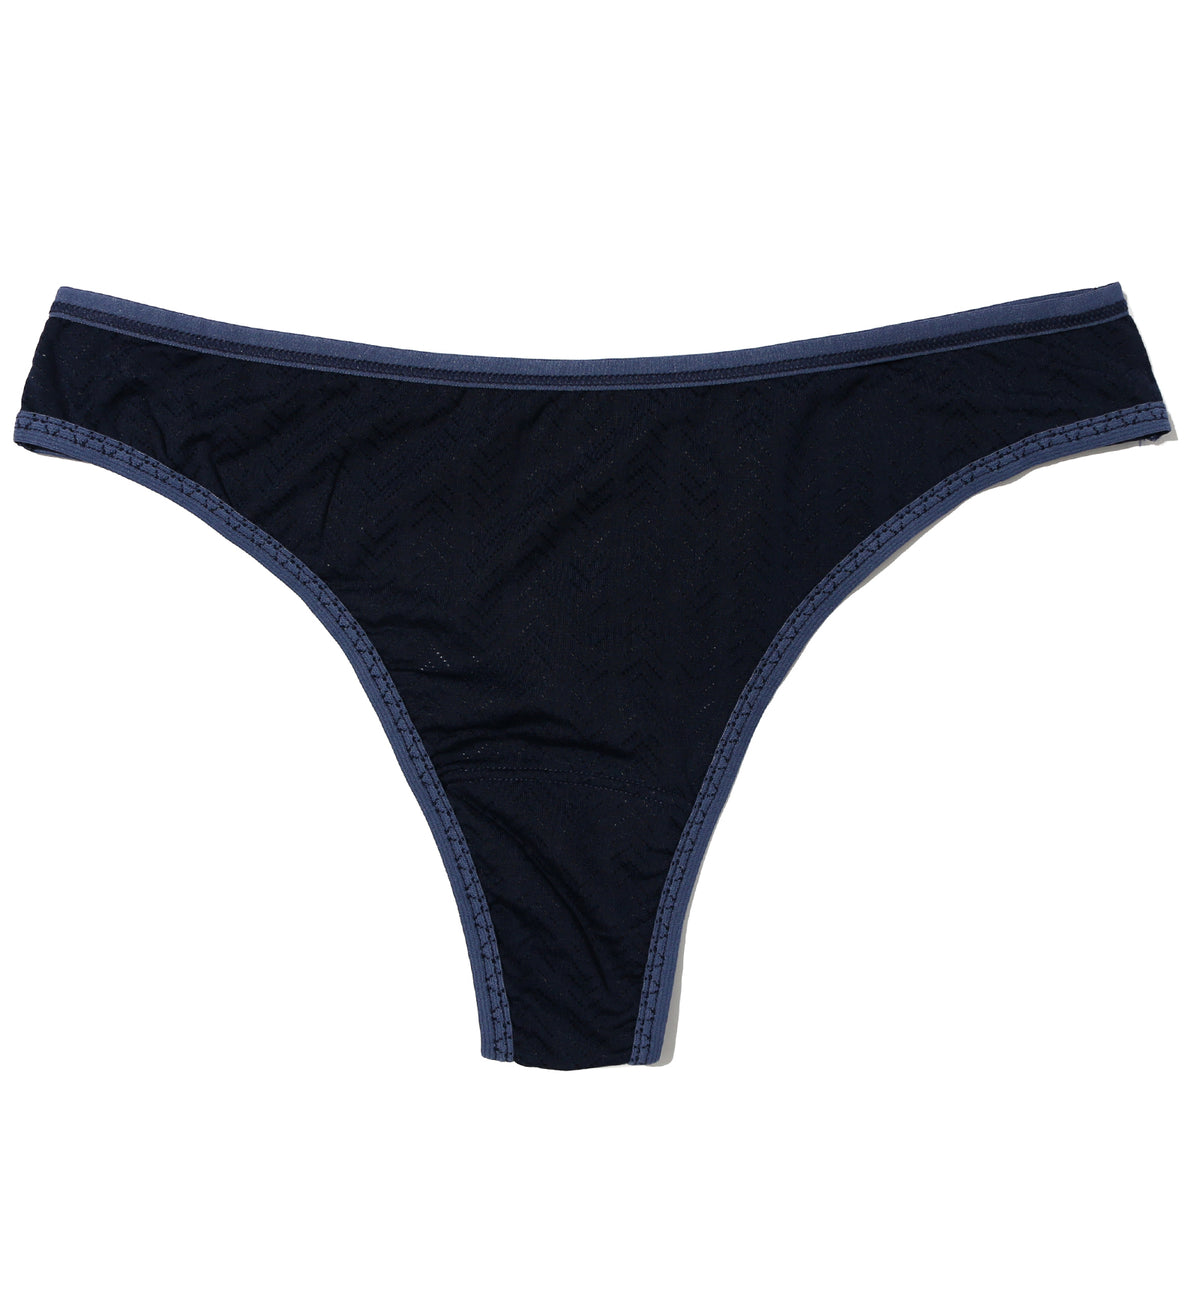 Hanky Panky MoveCalm Natural Rise Thong (2P1664),XS,Blackberry Crumble/Waterfall Blue - Blackberry Crumble/Waterfall Blue,XS